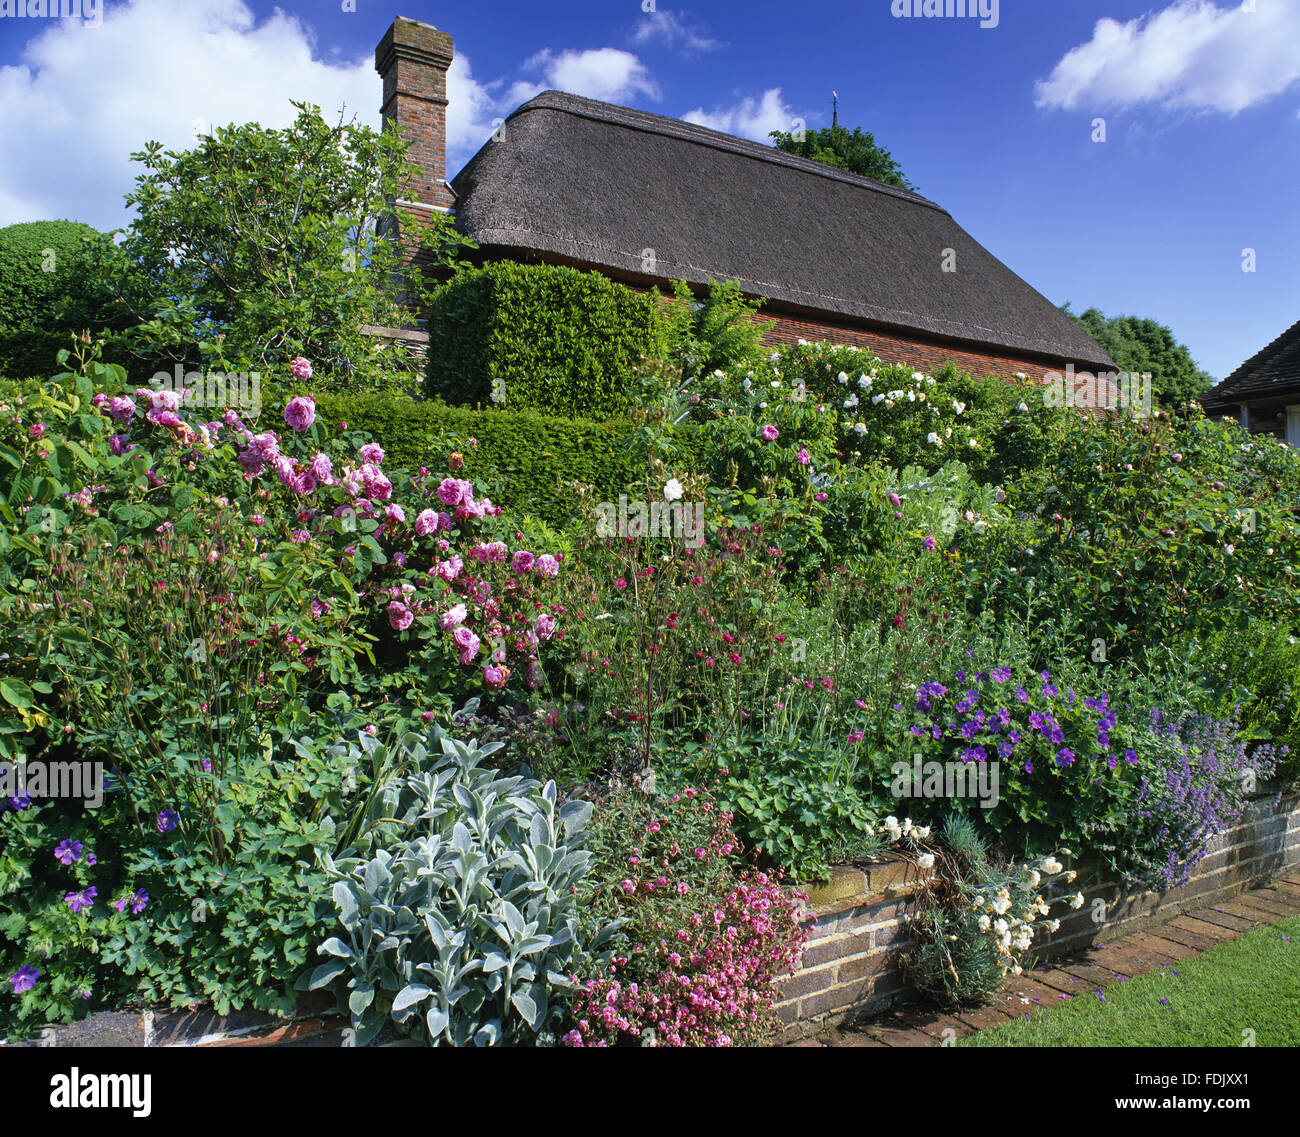 Looking over the raised bank of planting in the garden towards Alfriston Clergy House, East Sussex.  It was the first building to be acquired by The National Trust, in 1896. Stock Photo